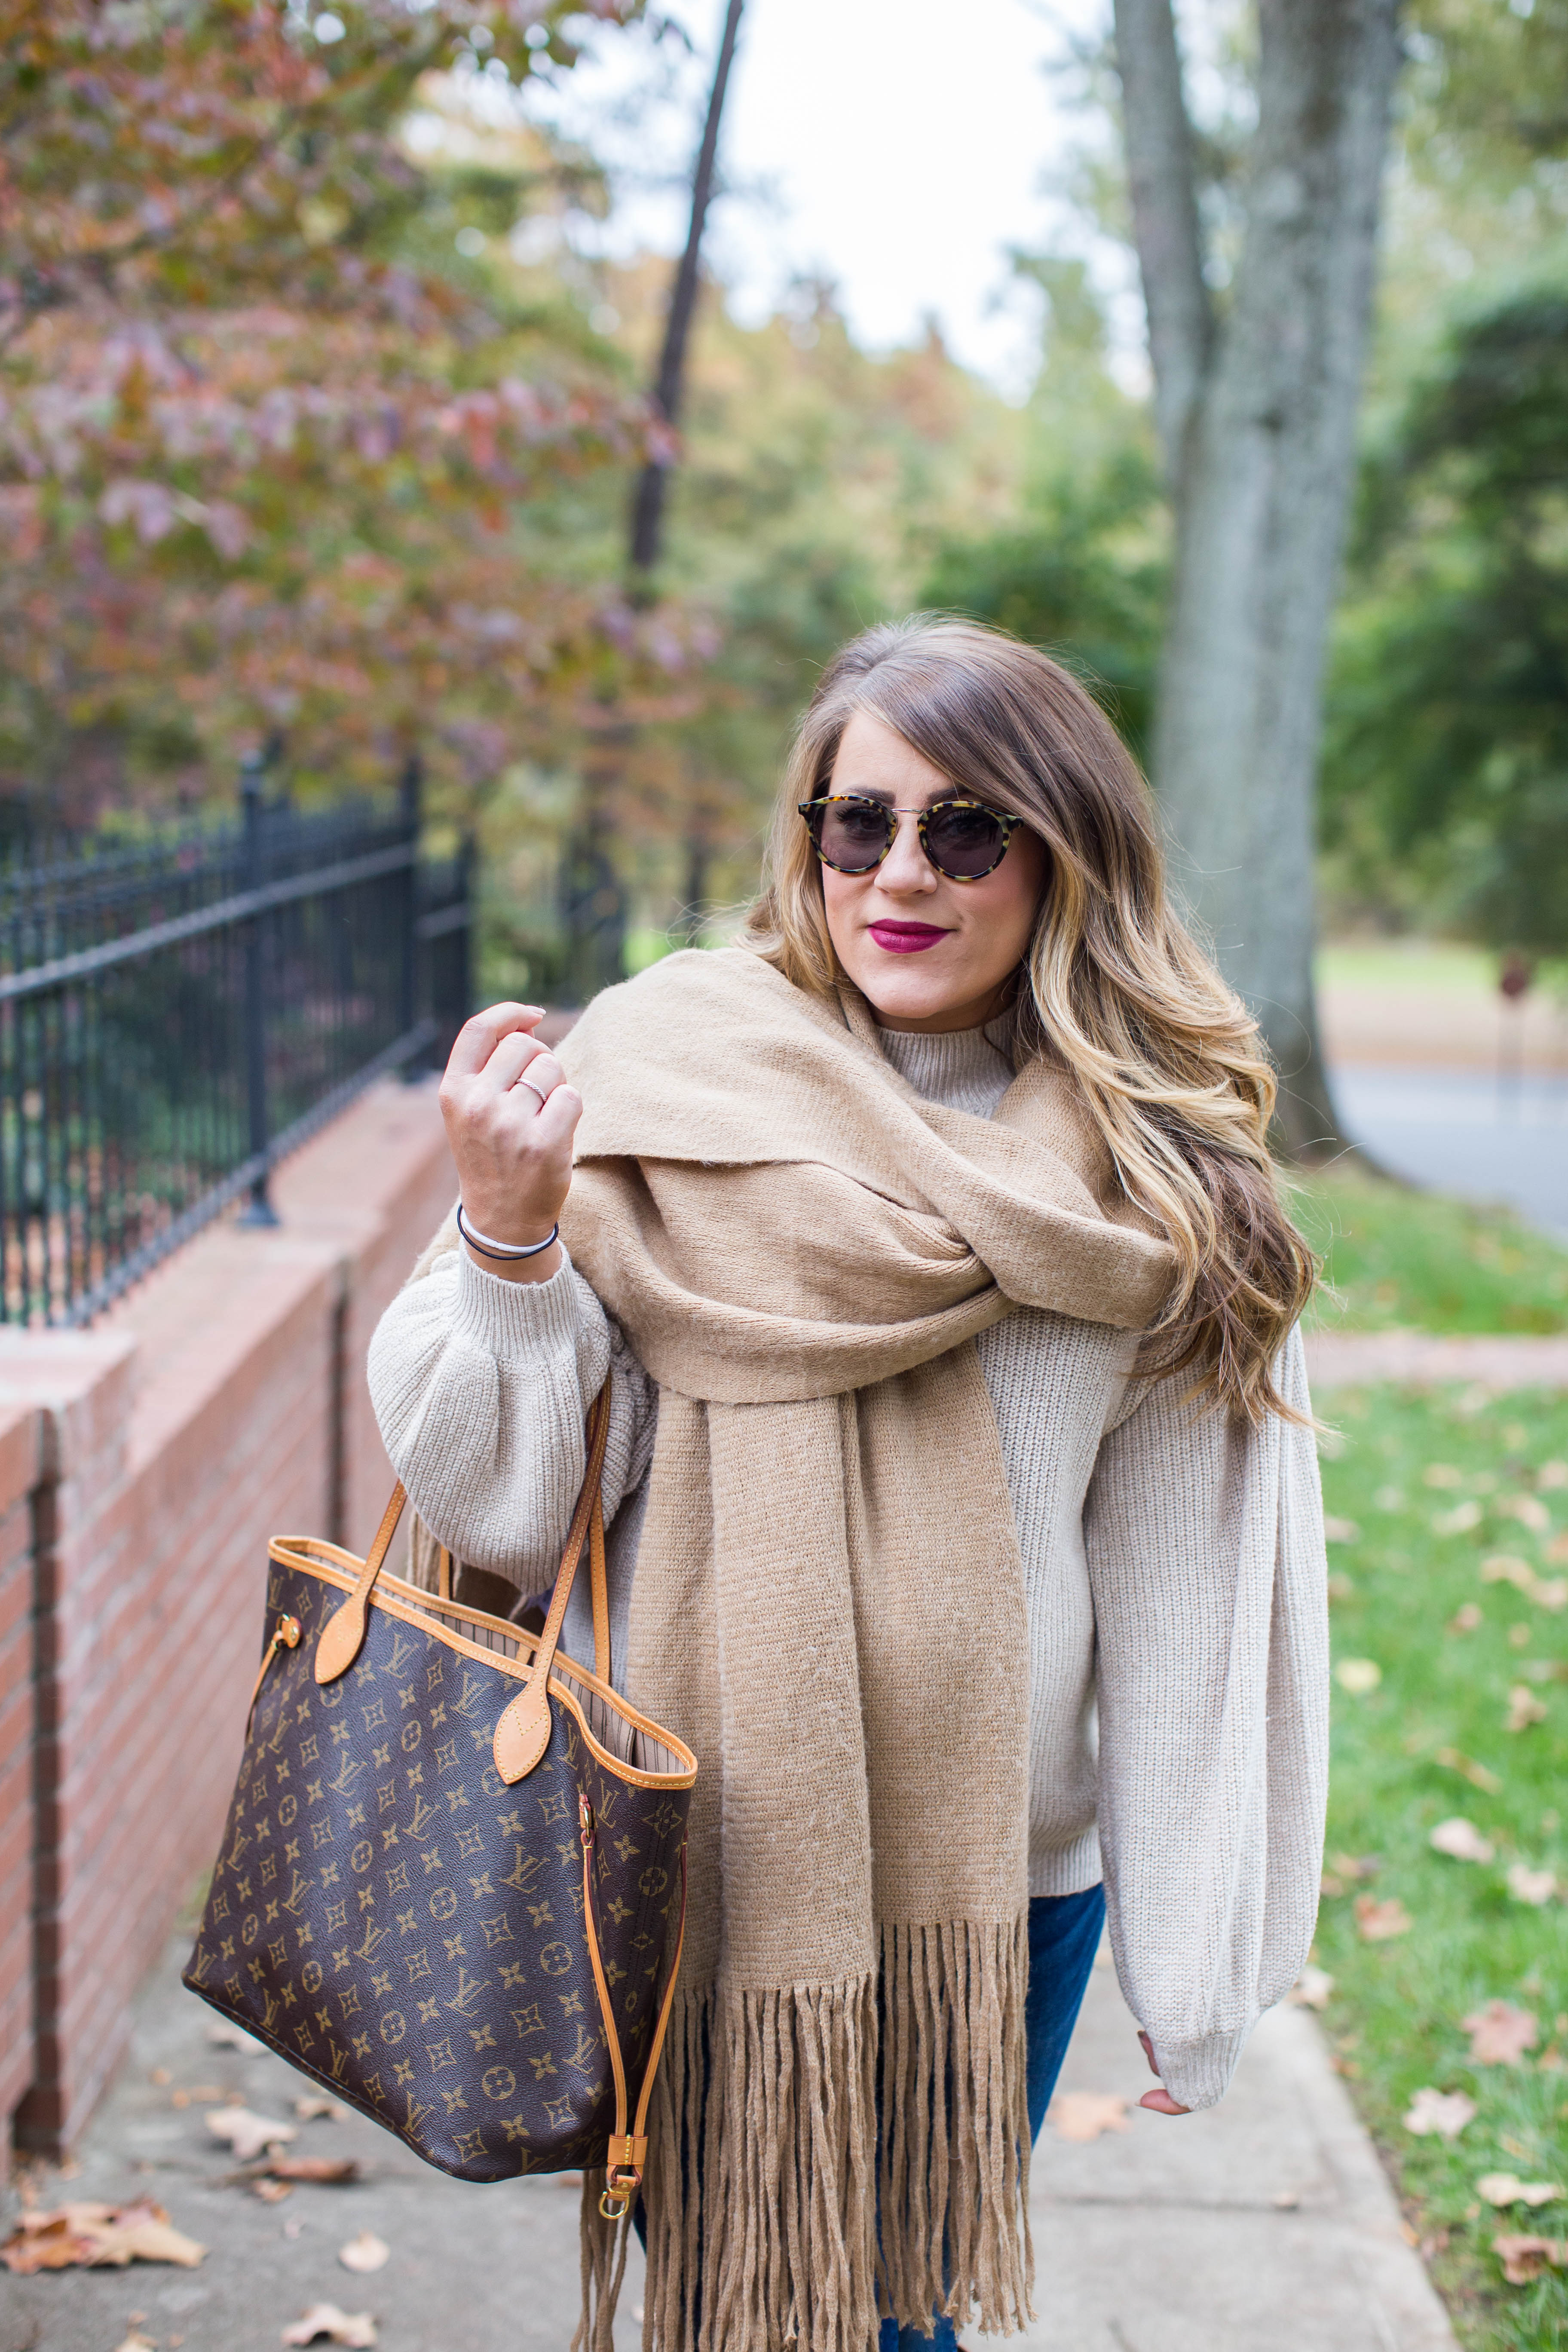 All Neutrals - Neutral Outfits Inspiration by North Carolina fashion blogger Coffee Beans and Bobby Pins